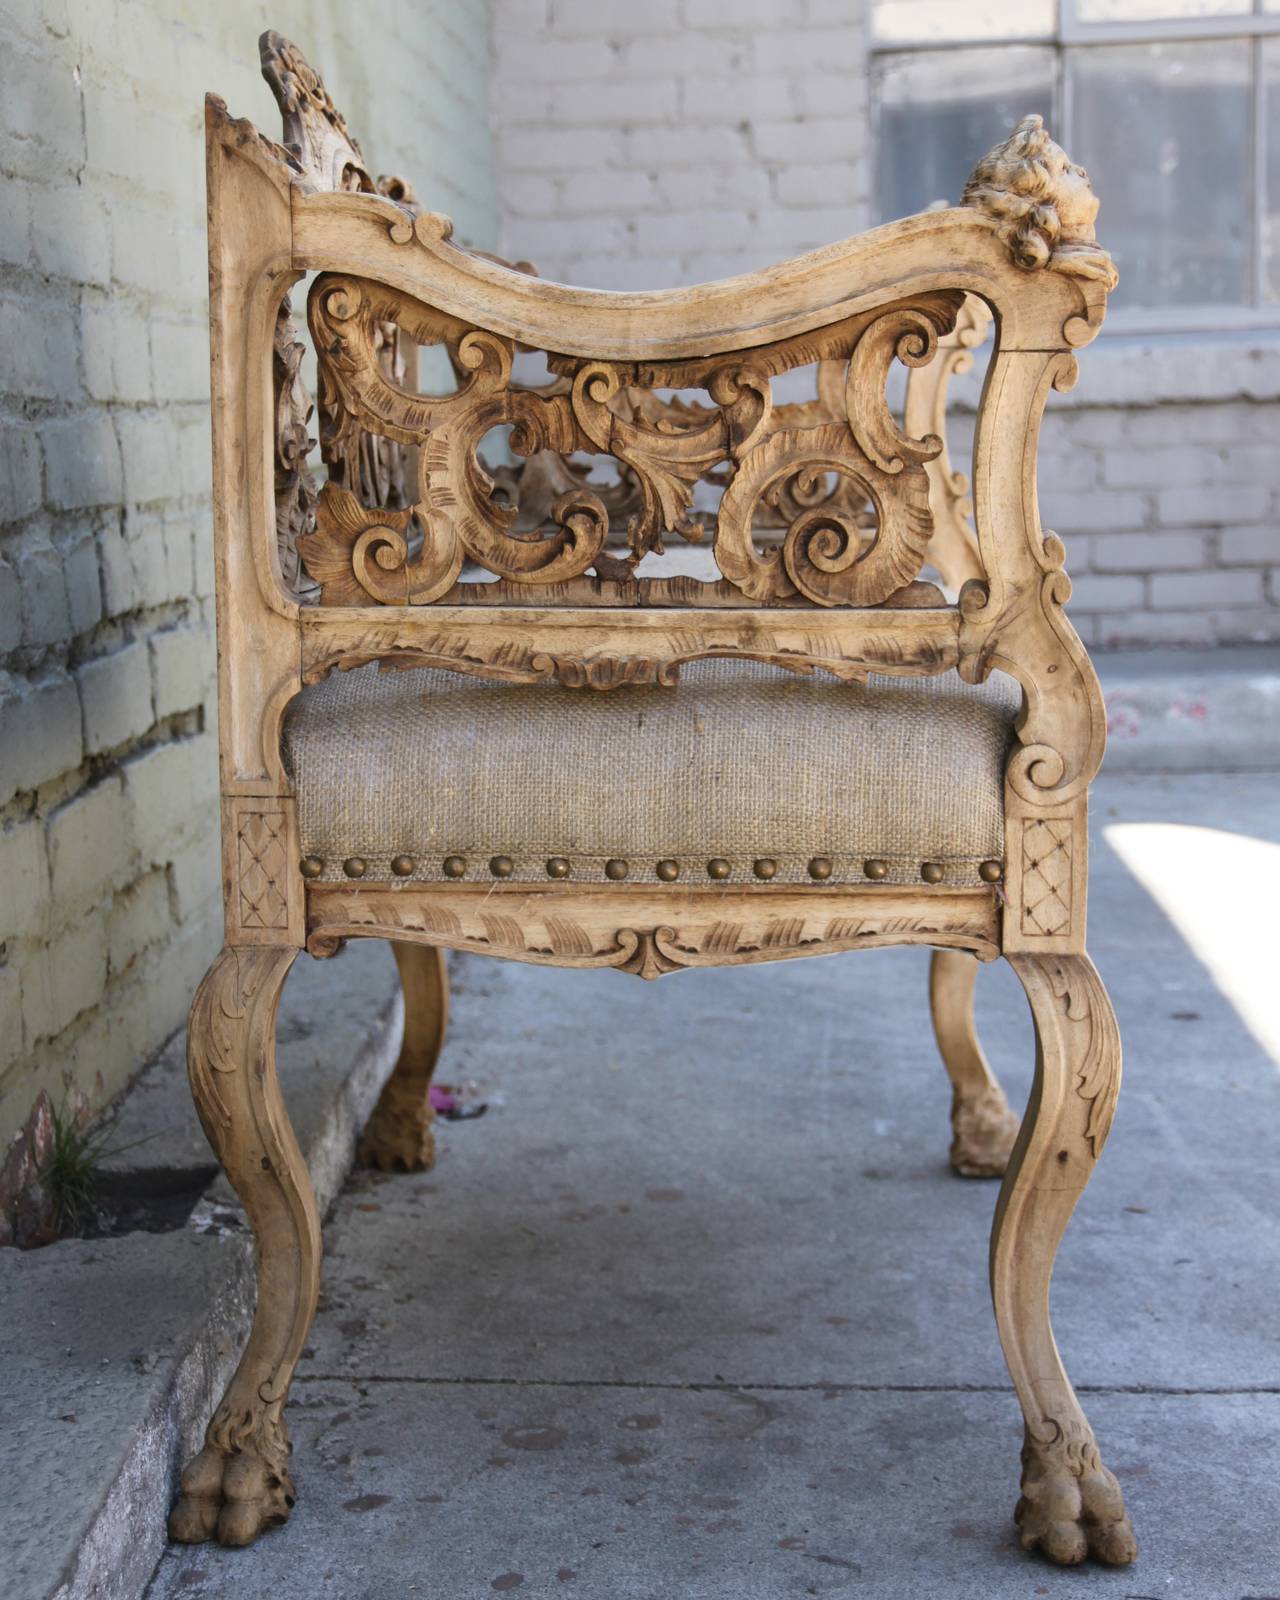 19th century Italian walnut bench with cherub faces and carved acanthus leaves though out. The bench is newly upholstered in burlap with self-welt and spaced nailhead trim detail.